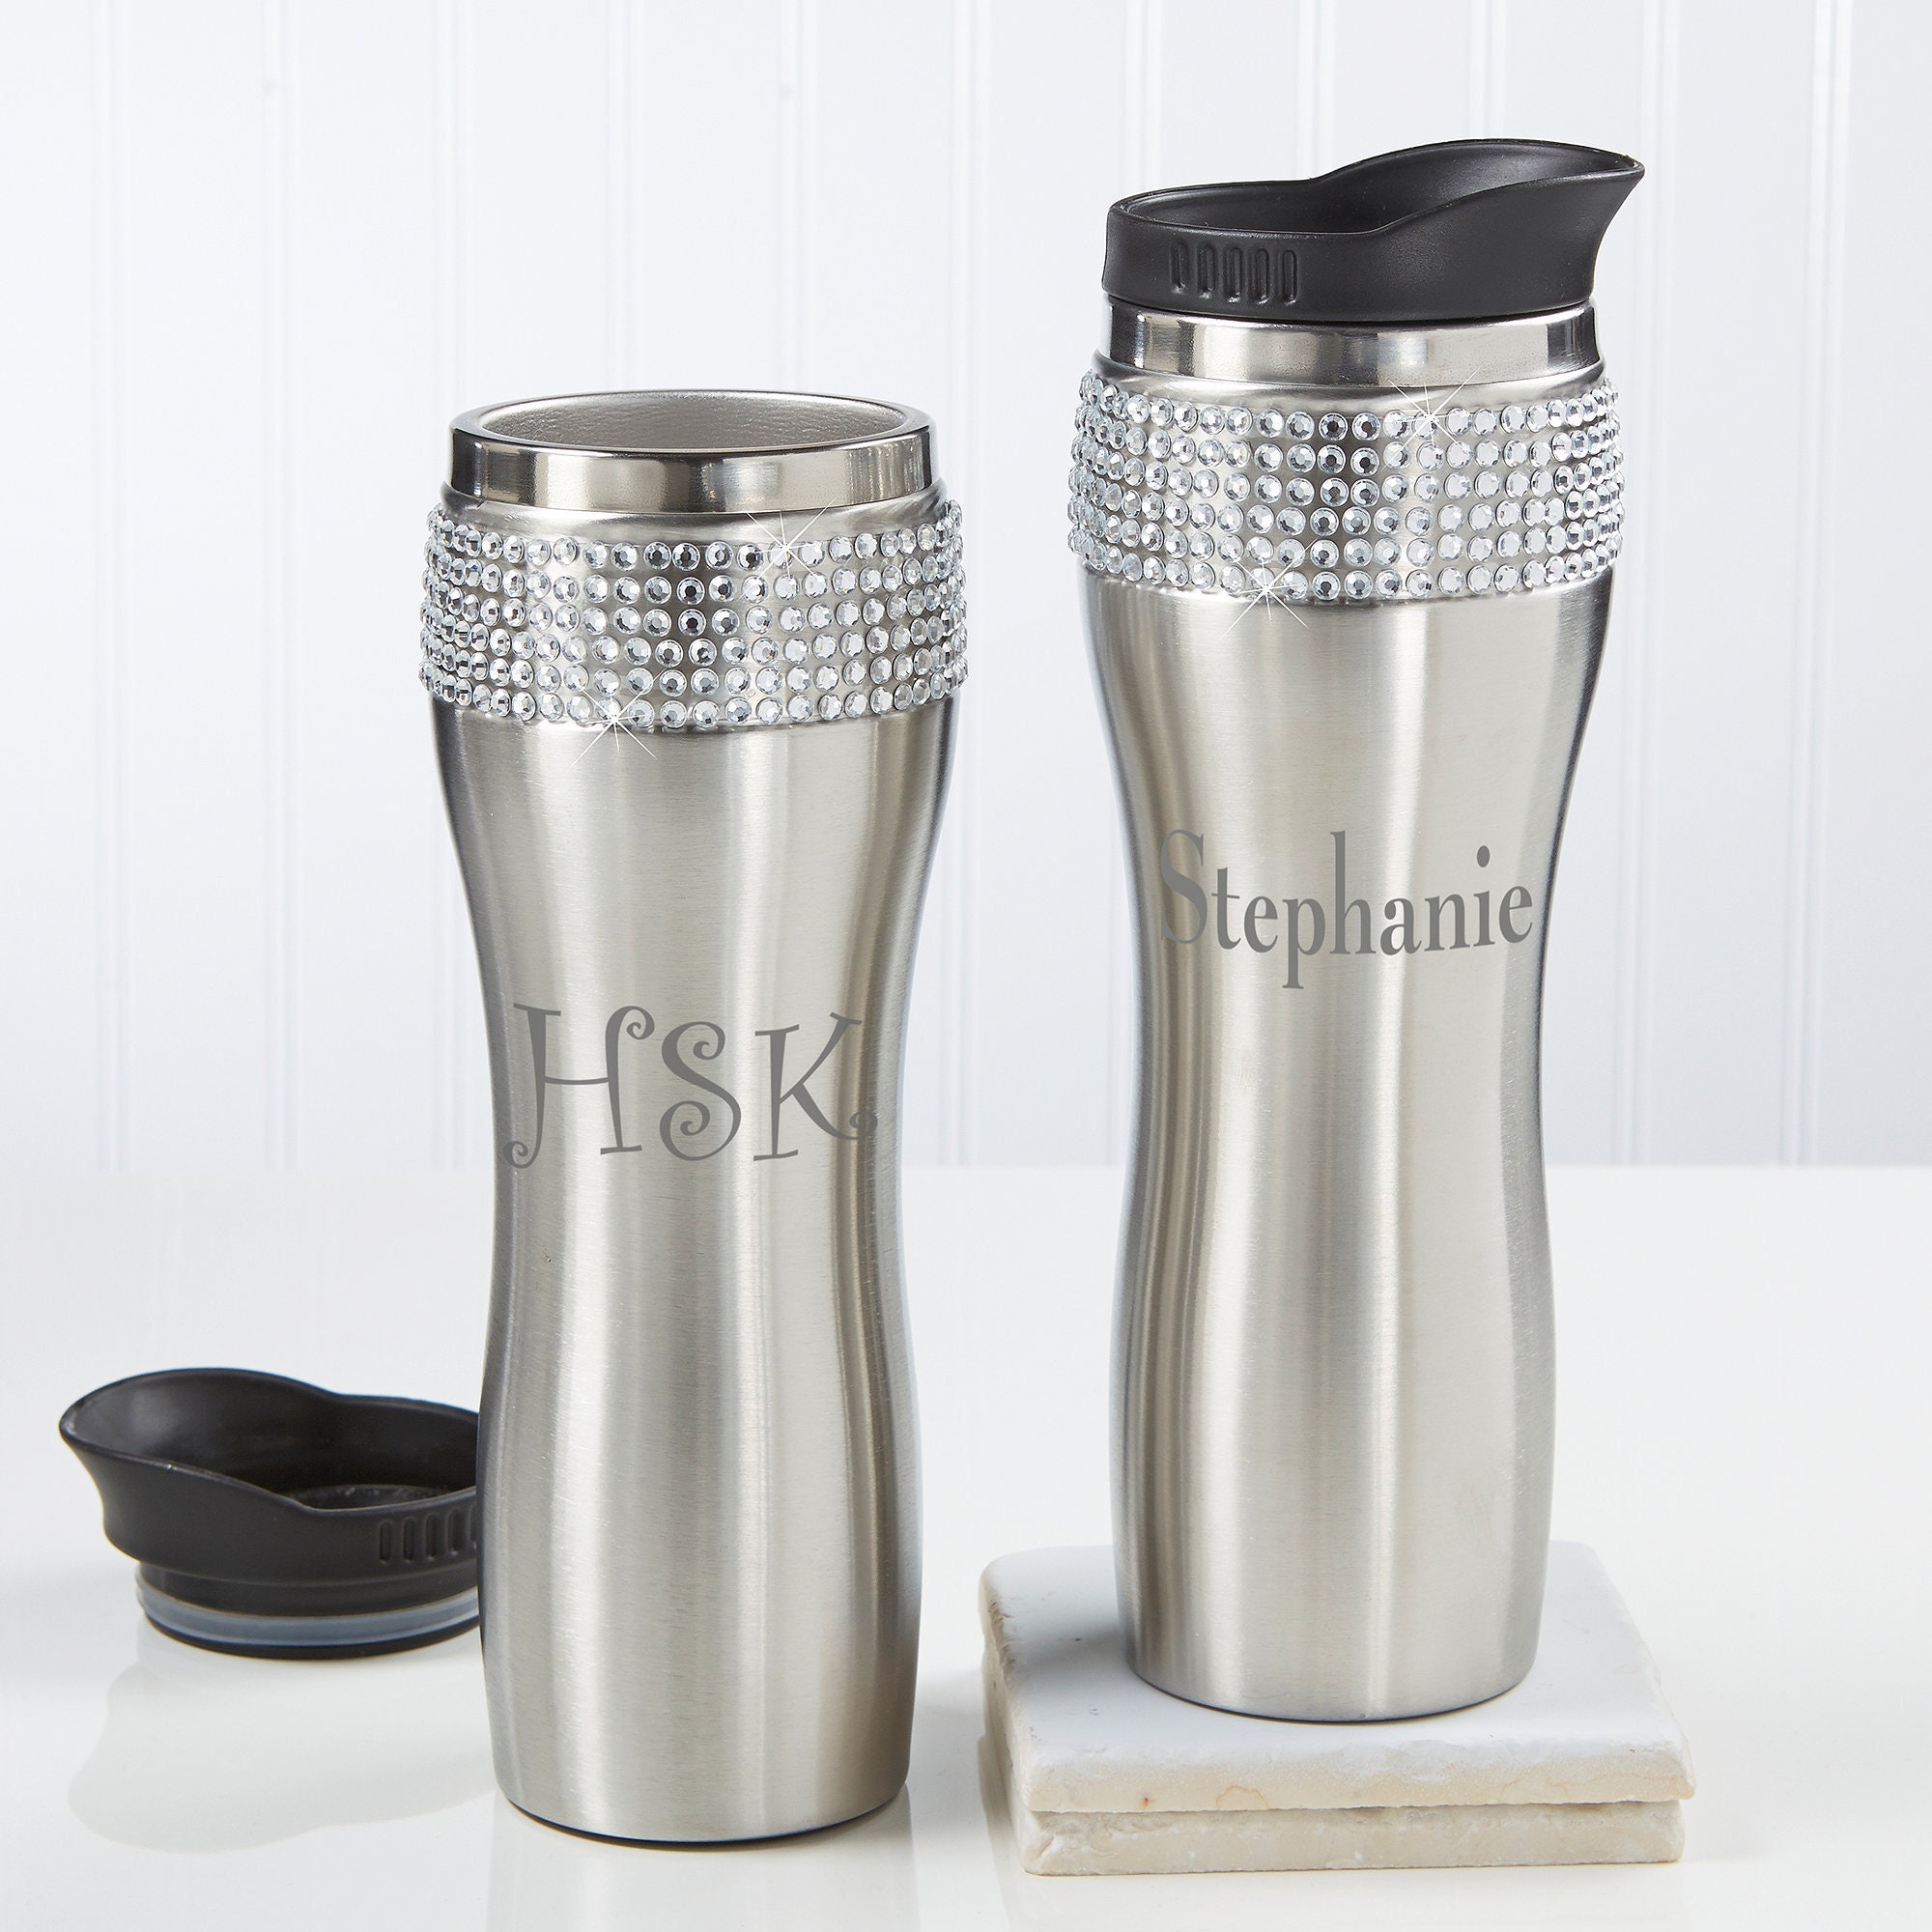 Zodensot 750ml Rhinestone Thermos Cup, Stainless Steel Thermal Bottle, High-end Insulated Thermos Coffee Cups, Diamond Bling Vacuum fl